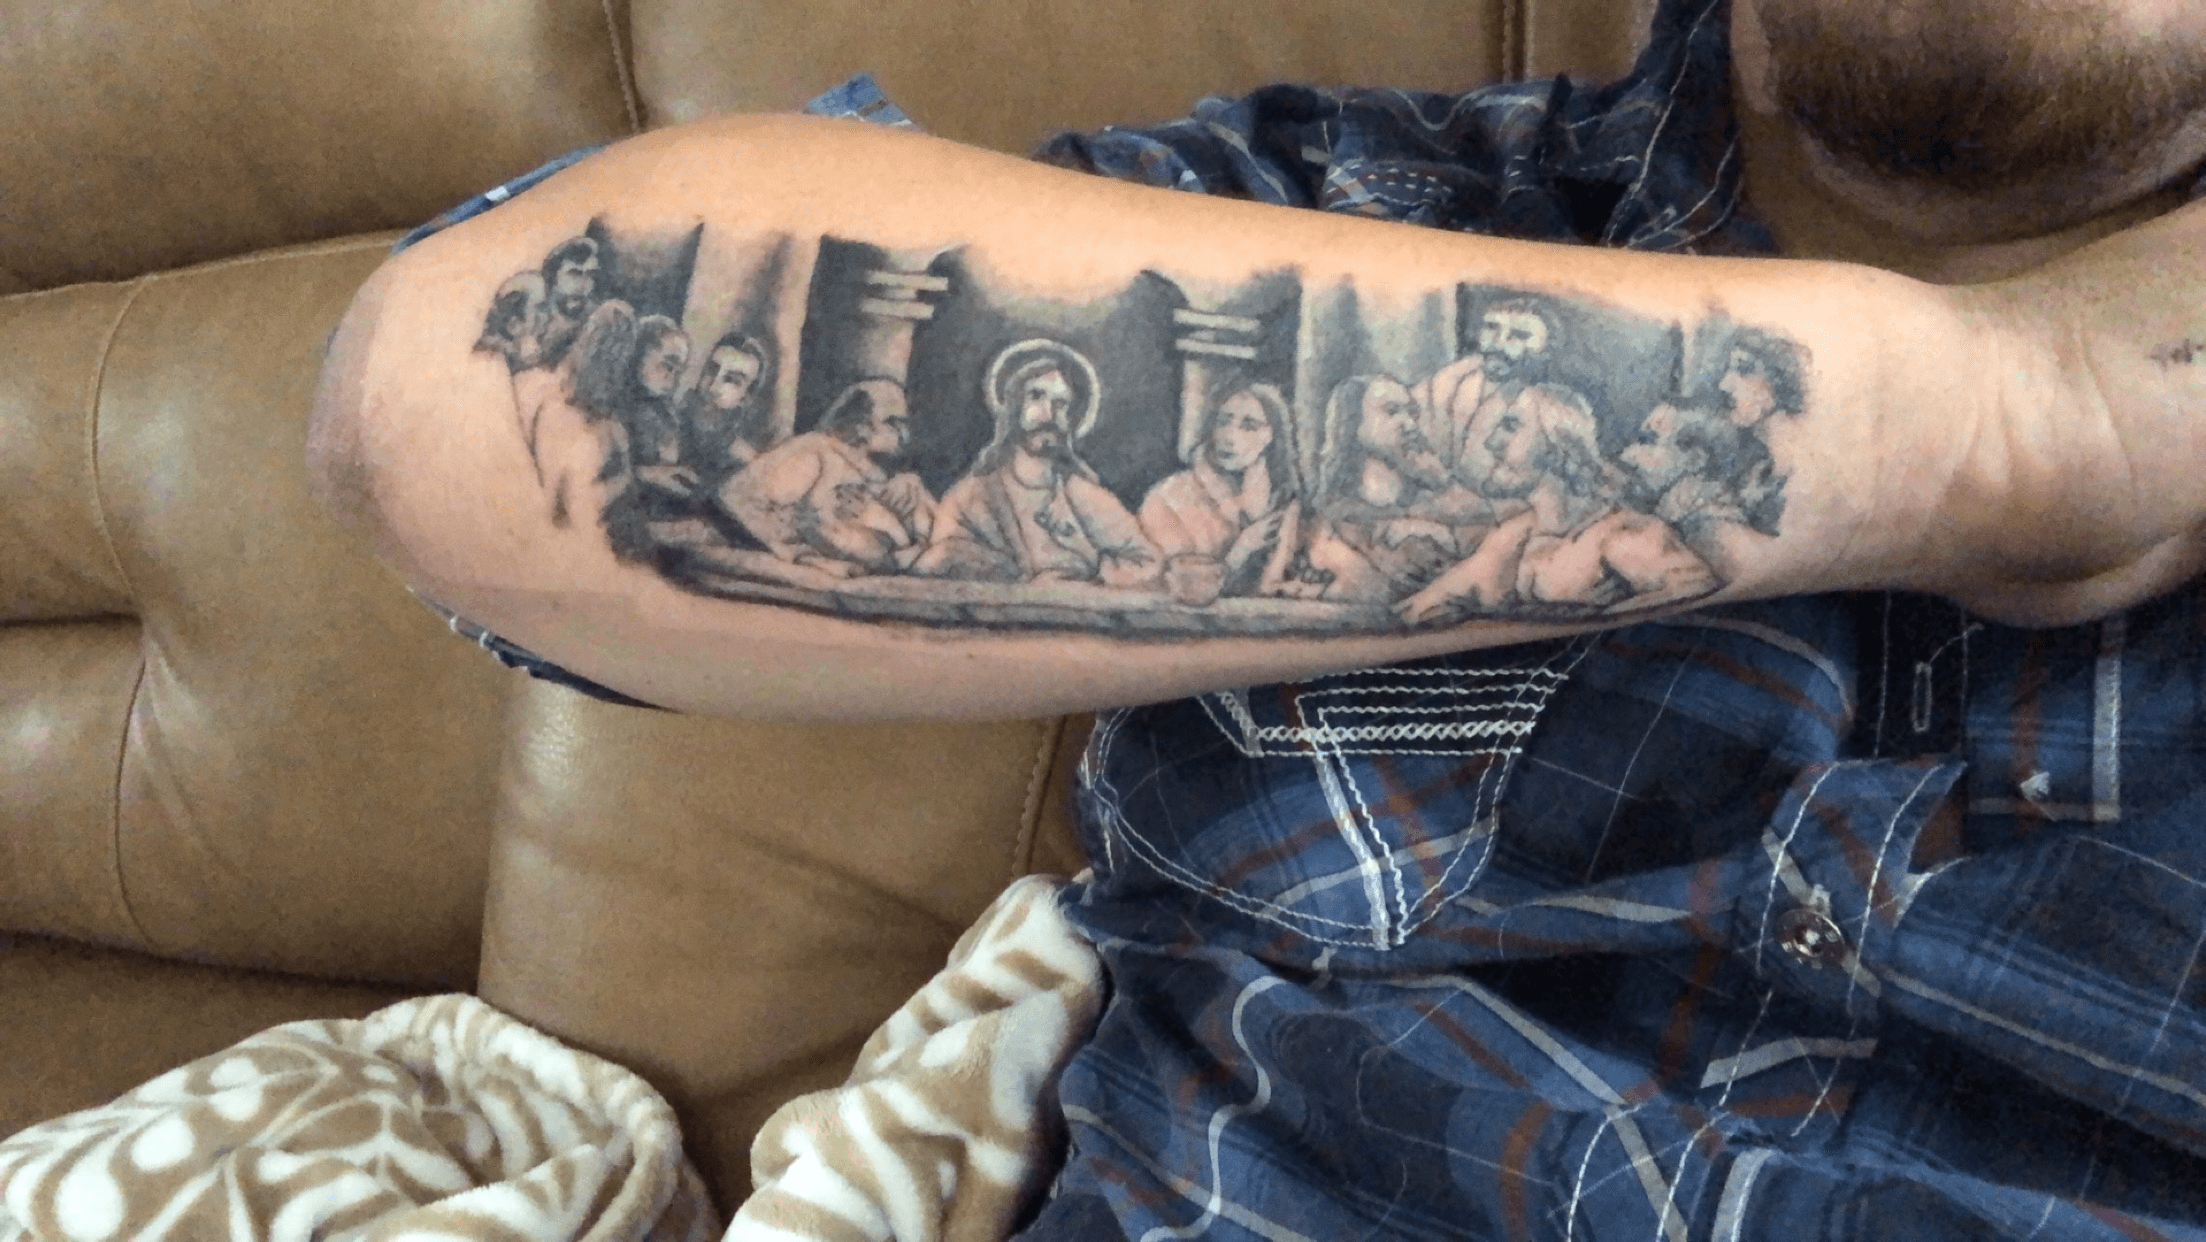 The Last Supper Half healed  Sean Connolly Tattoos  Facebook